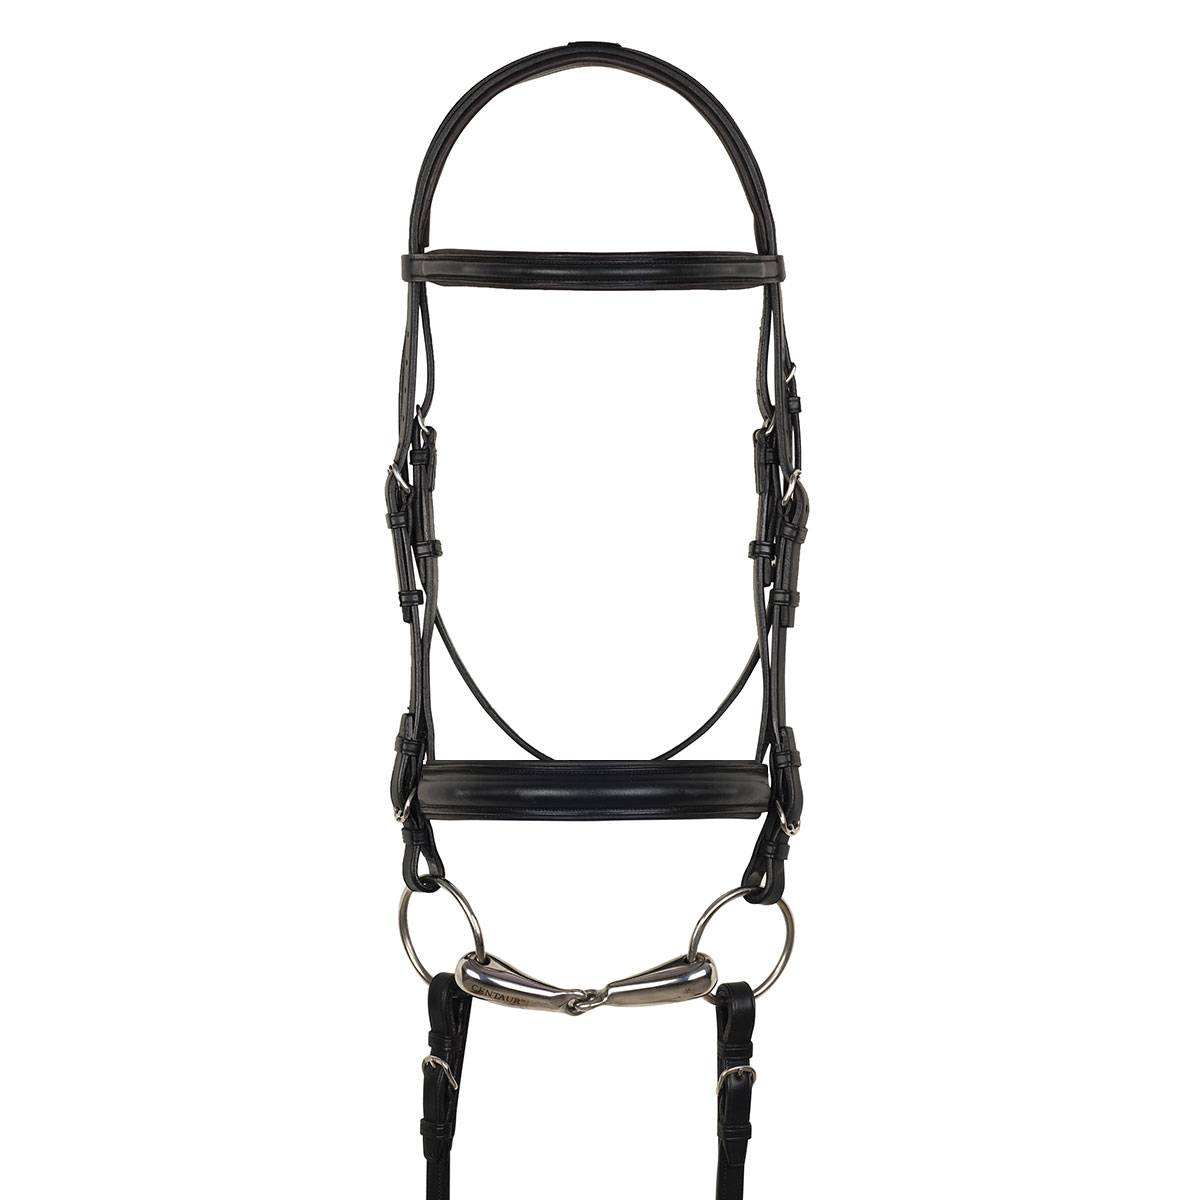 Aramas Plain Raised Padded 1-1/2 Wide Nose Dressage Bridle with Leather Reins